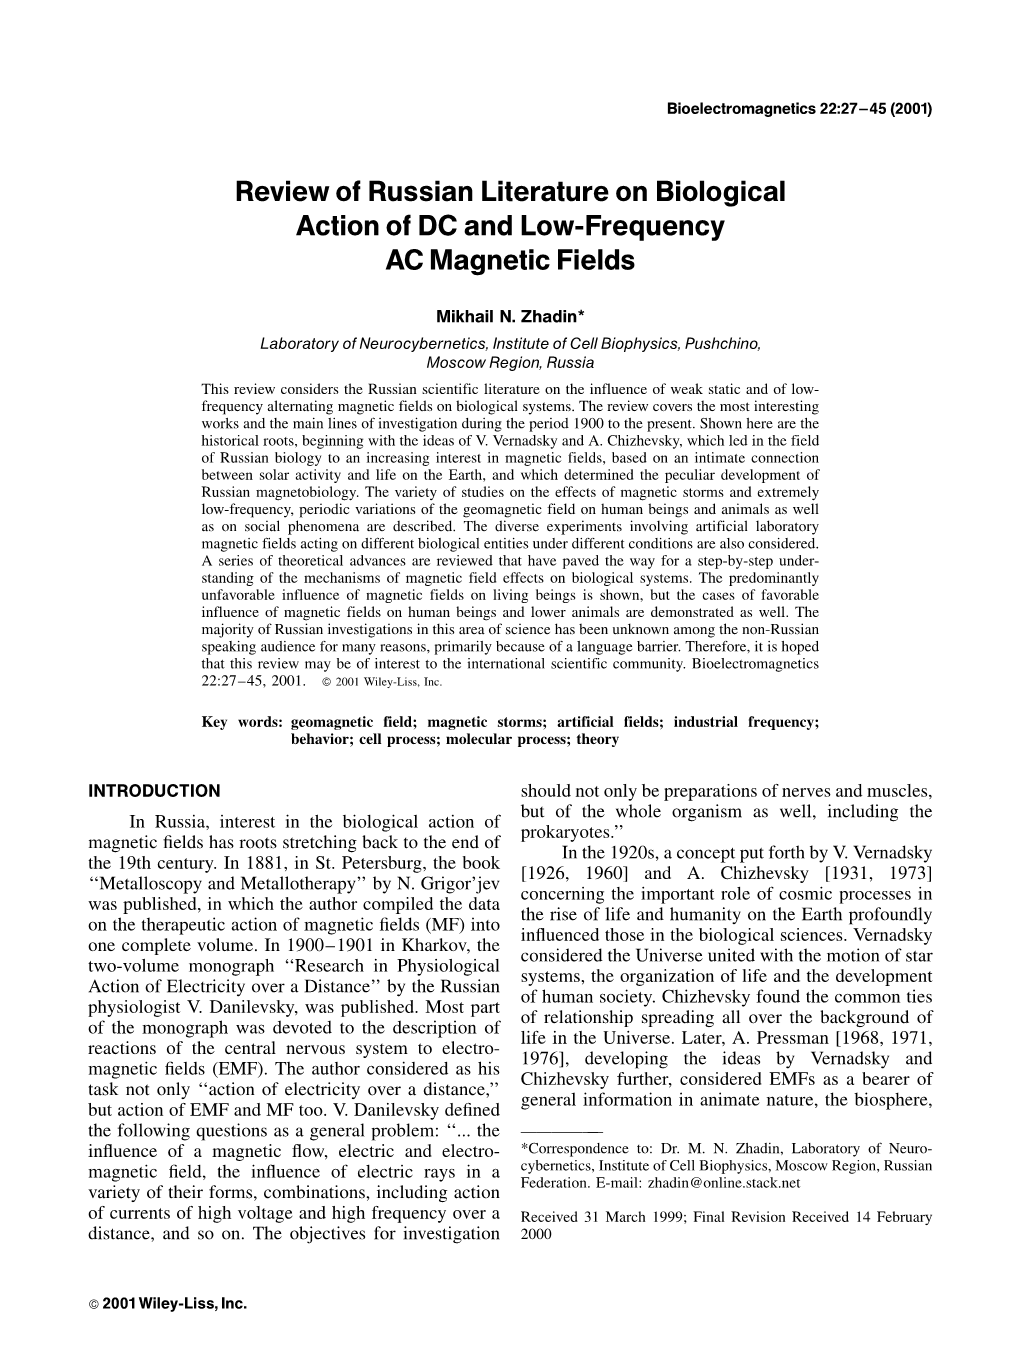 Review of Russian Literature on Biological Action of DC and Low-Frequency AC Magnetic Fields